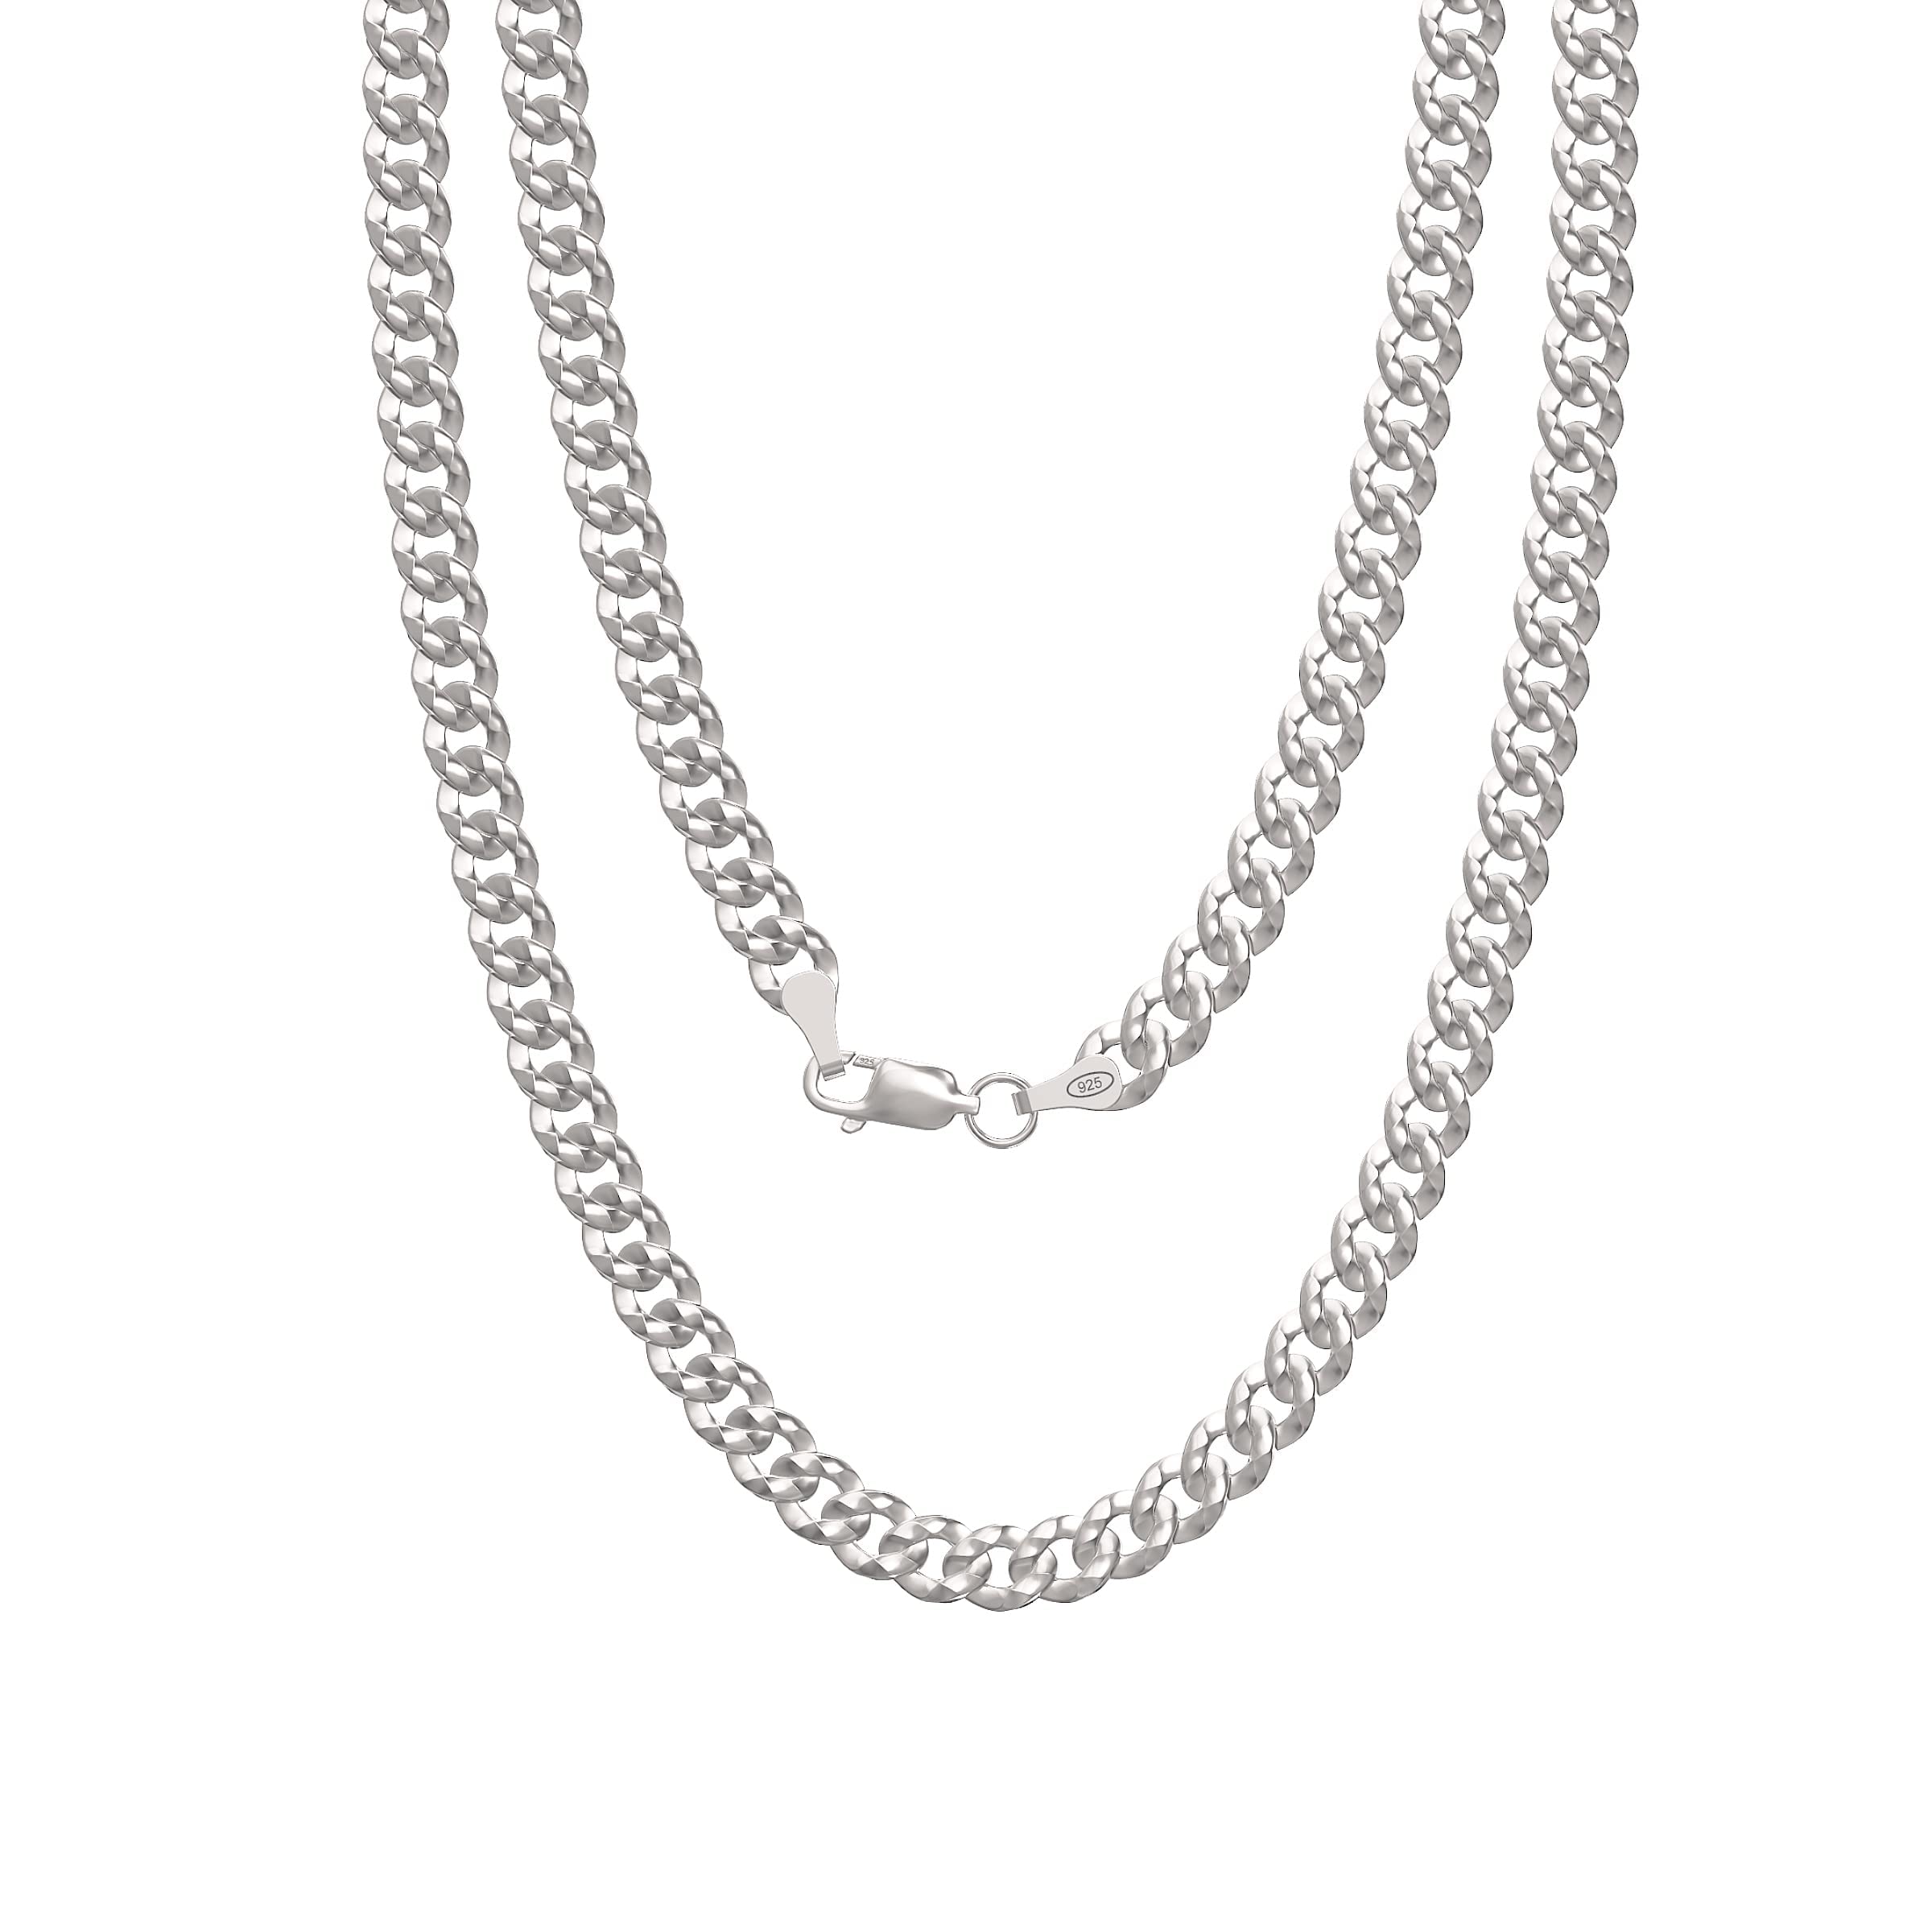 Aeon Jewellery Mens Chain Necklace - 5mm | Hallmarked 925 Sterling Silver Jewellery